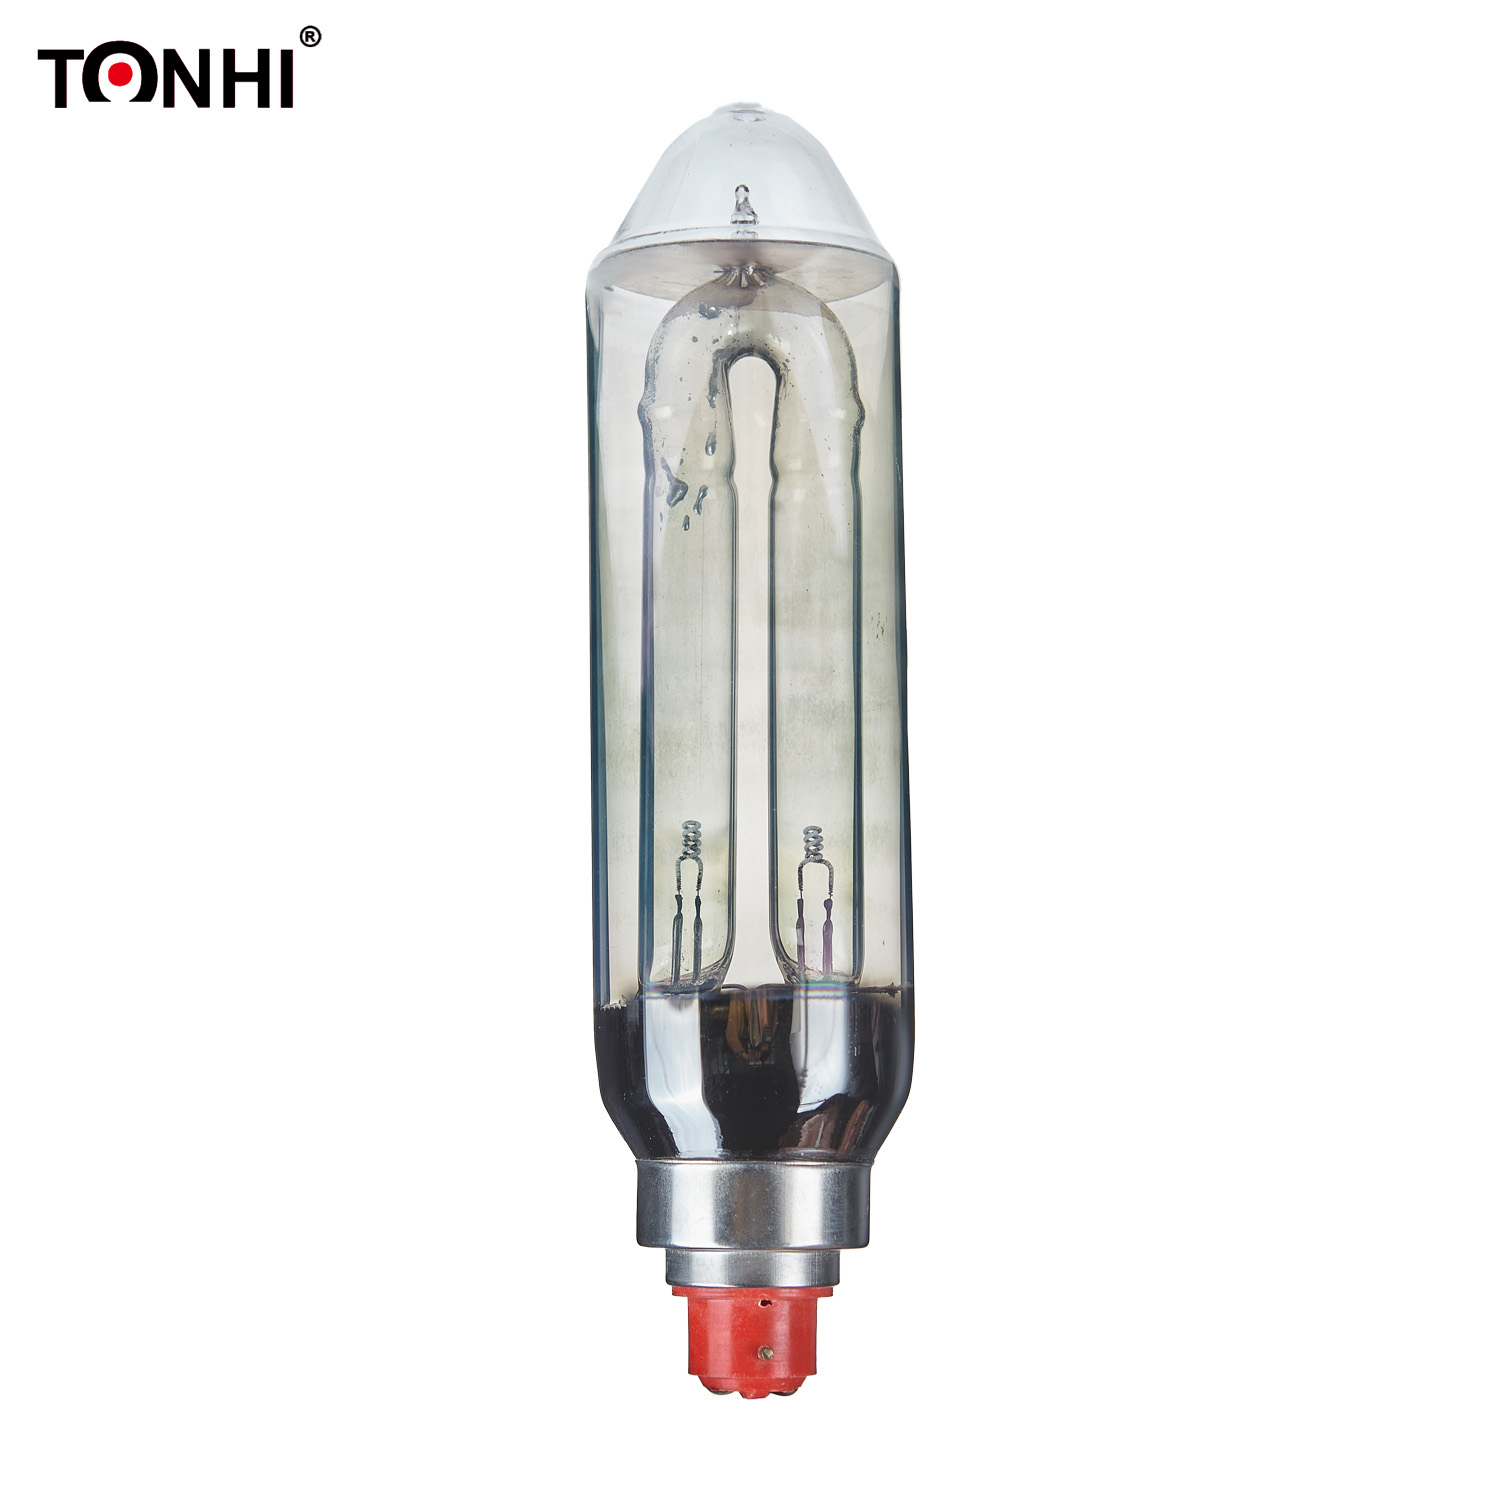 SOX 18W BY22d low pressure sodium Lamp